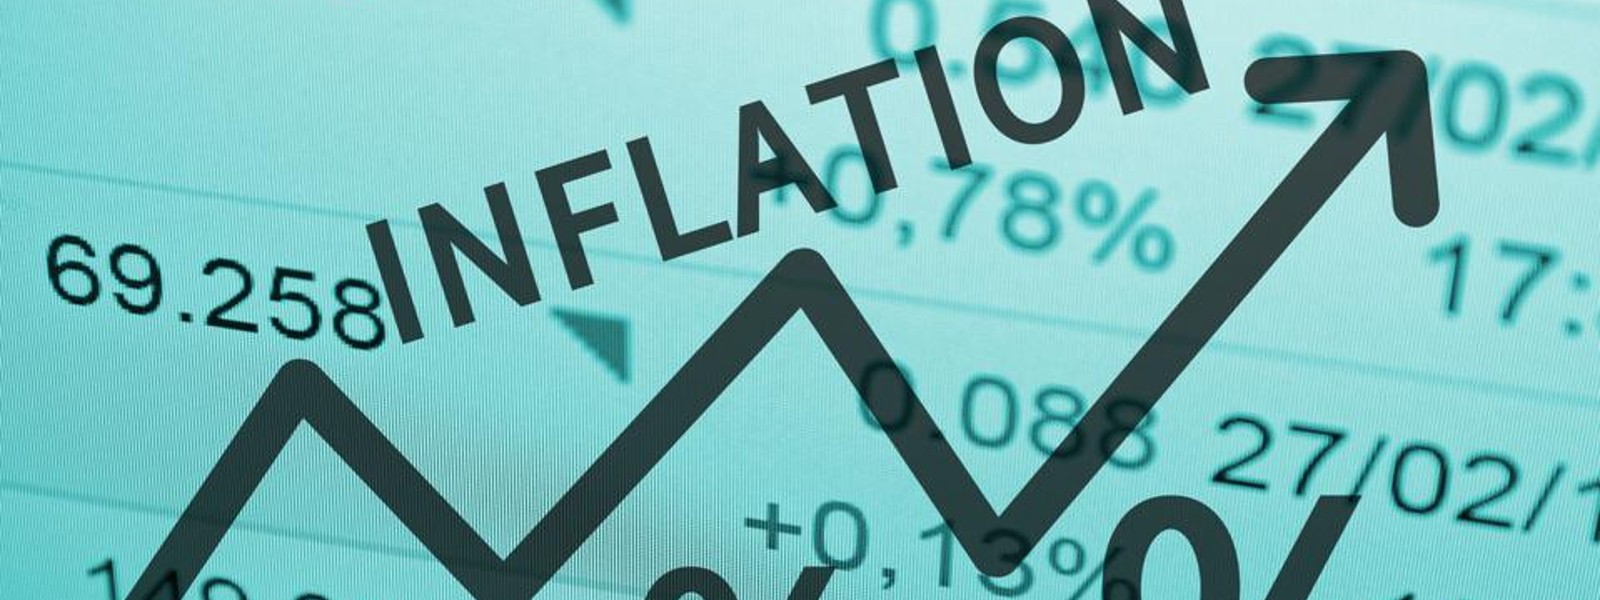 Sri Lanka’s inflation hits close to 40% in May 2022